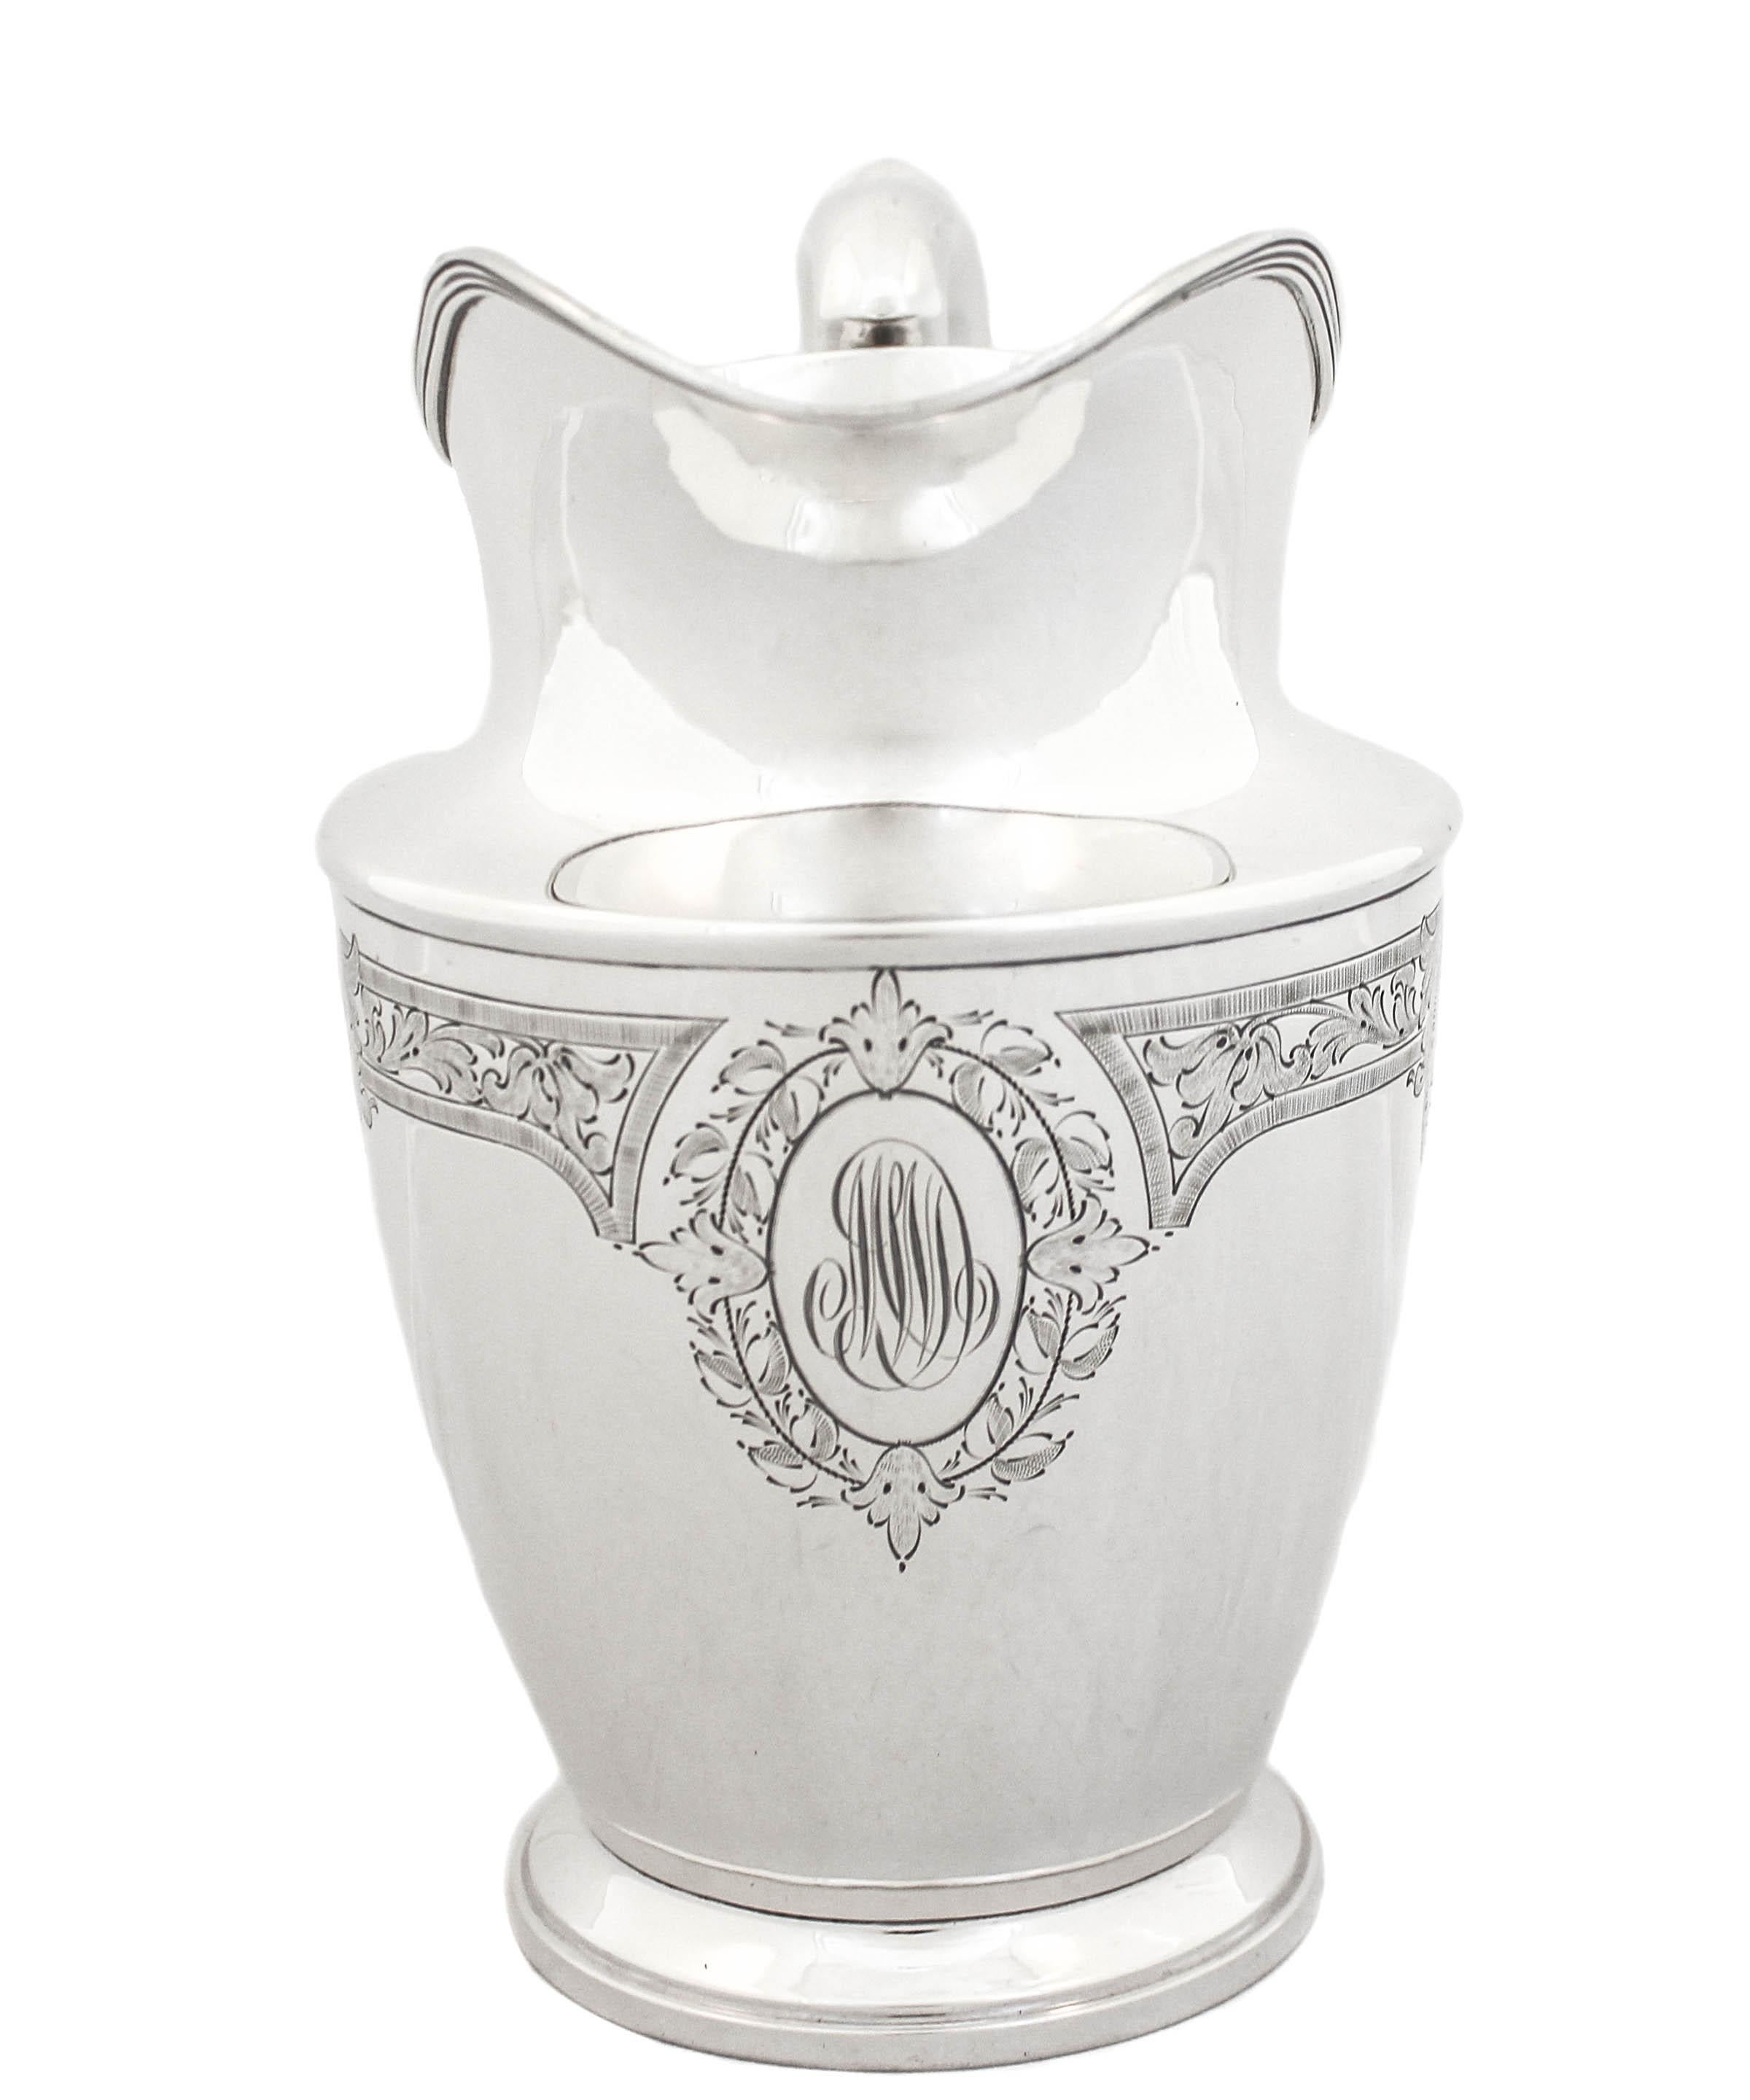 We are delighted to offer you this sterling silver water pitcher by the Schofield Silver Co of Baltimore, Maryland. It is a very impressive large piece that has a lot of presence. Sleek with just an etched floral motif going around the
upper-half.